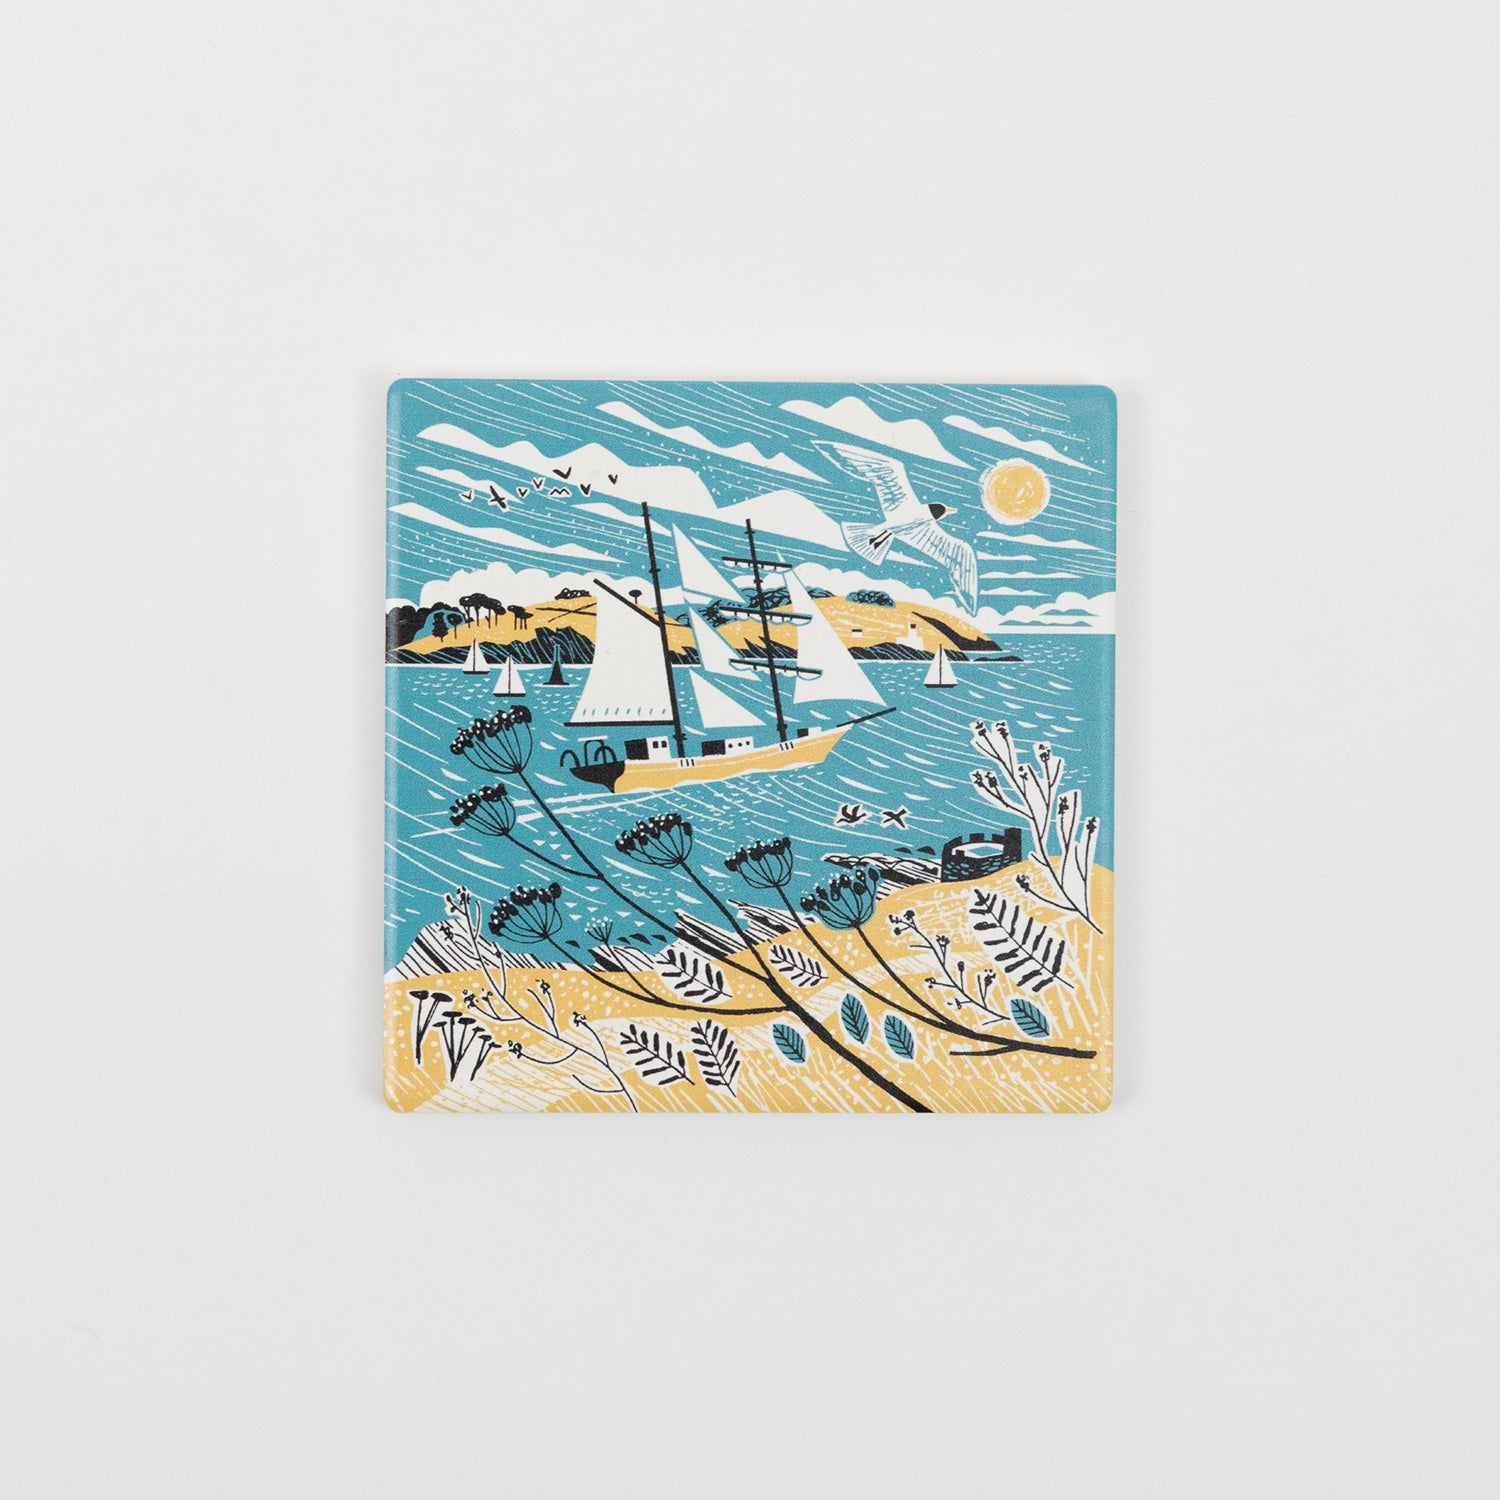 Falmouth Tall Ships Magnet in a blue, yellow and white design featuring a tall ship in full sail.